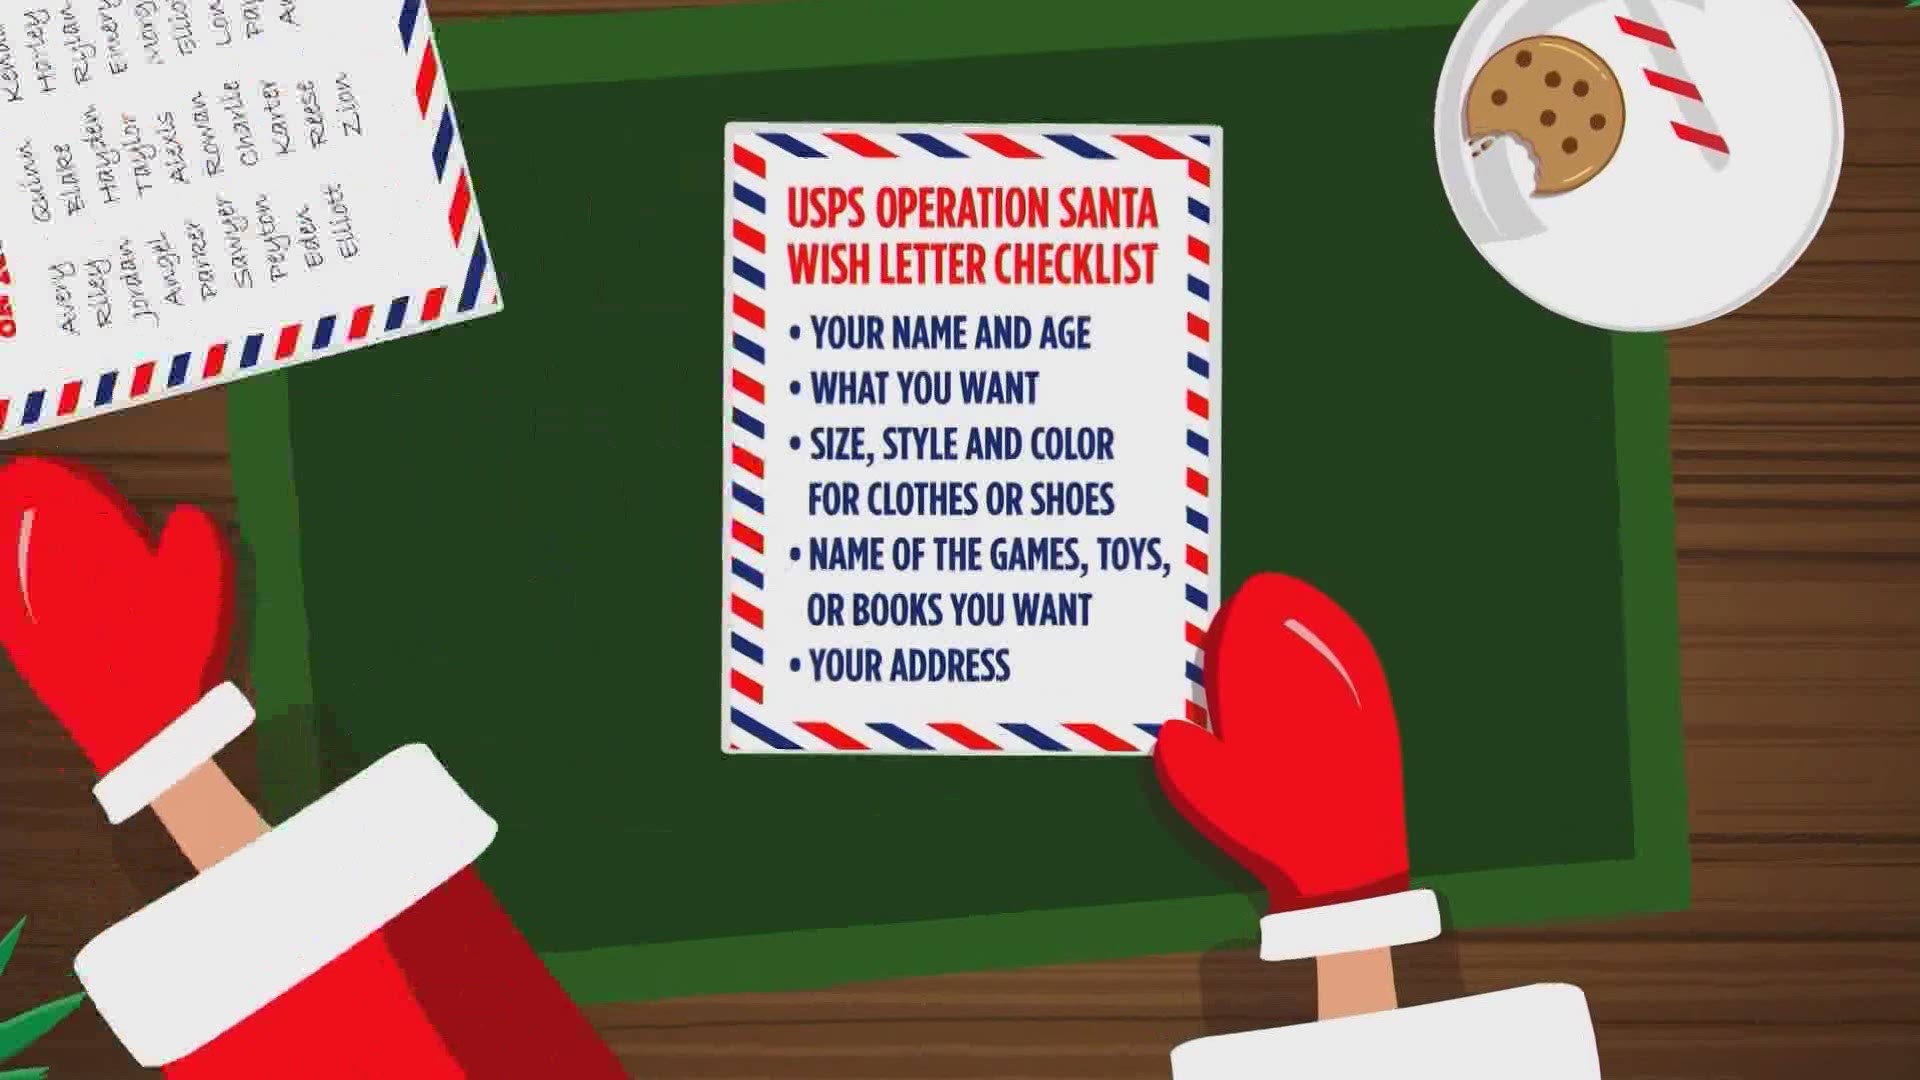 You can help the United States Postal Service keep the magic of "Jolly old Saint Nick" alive.